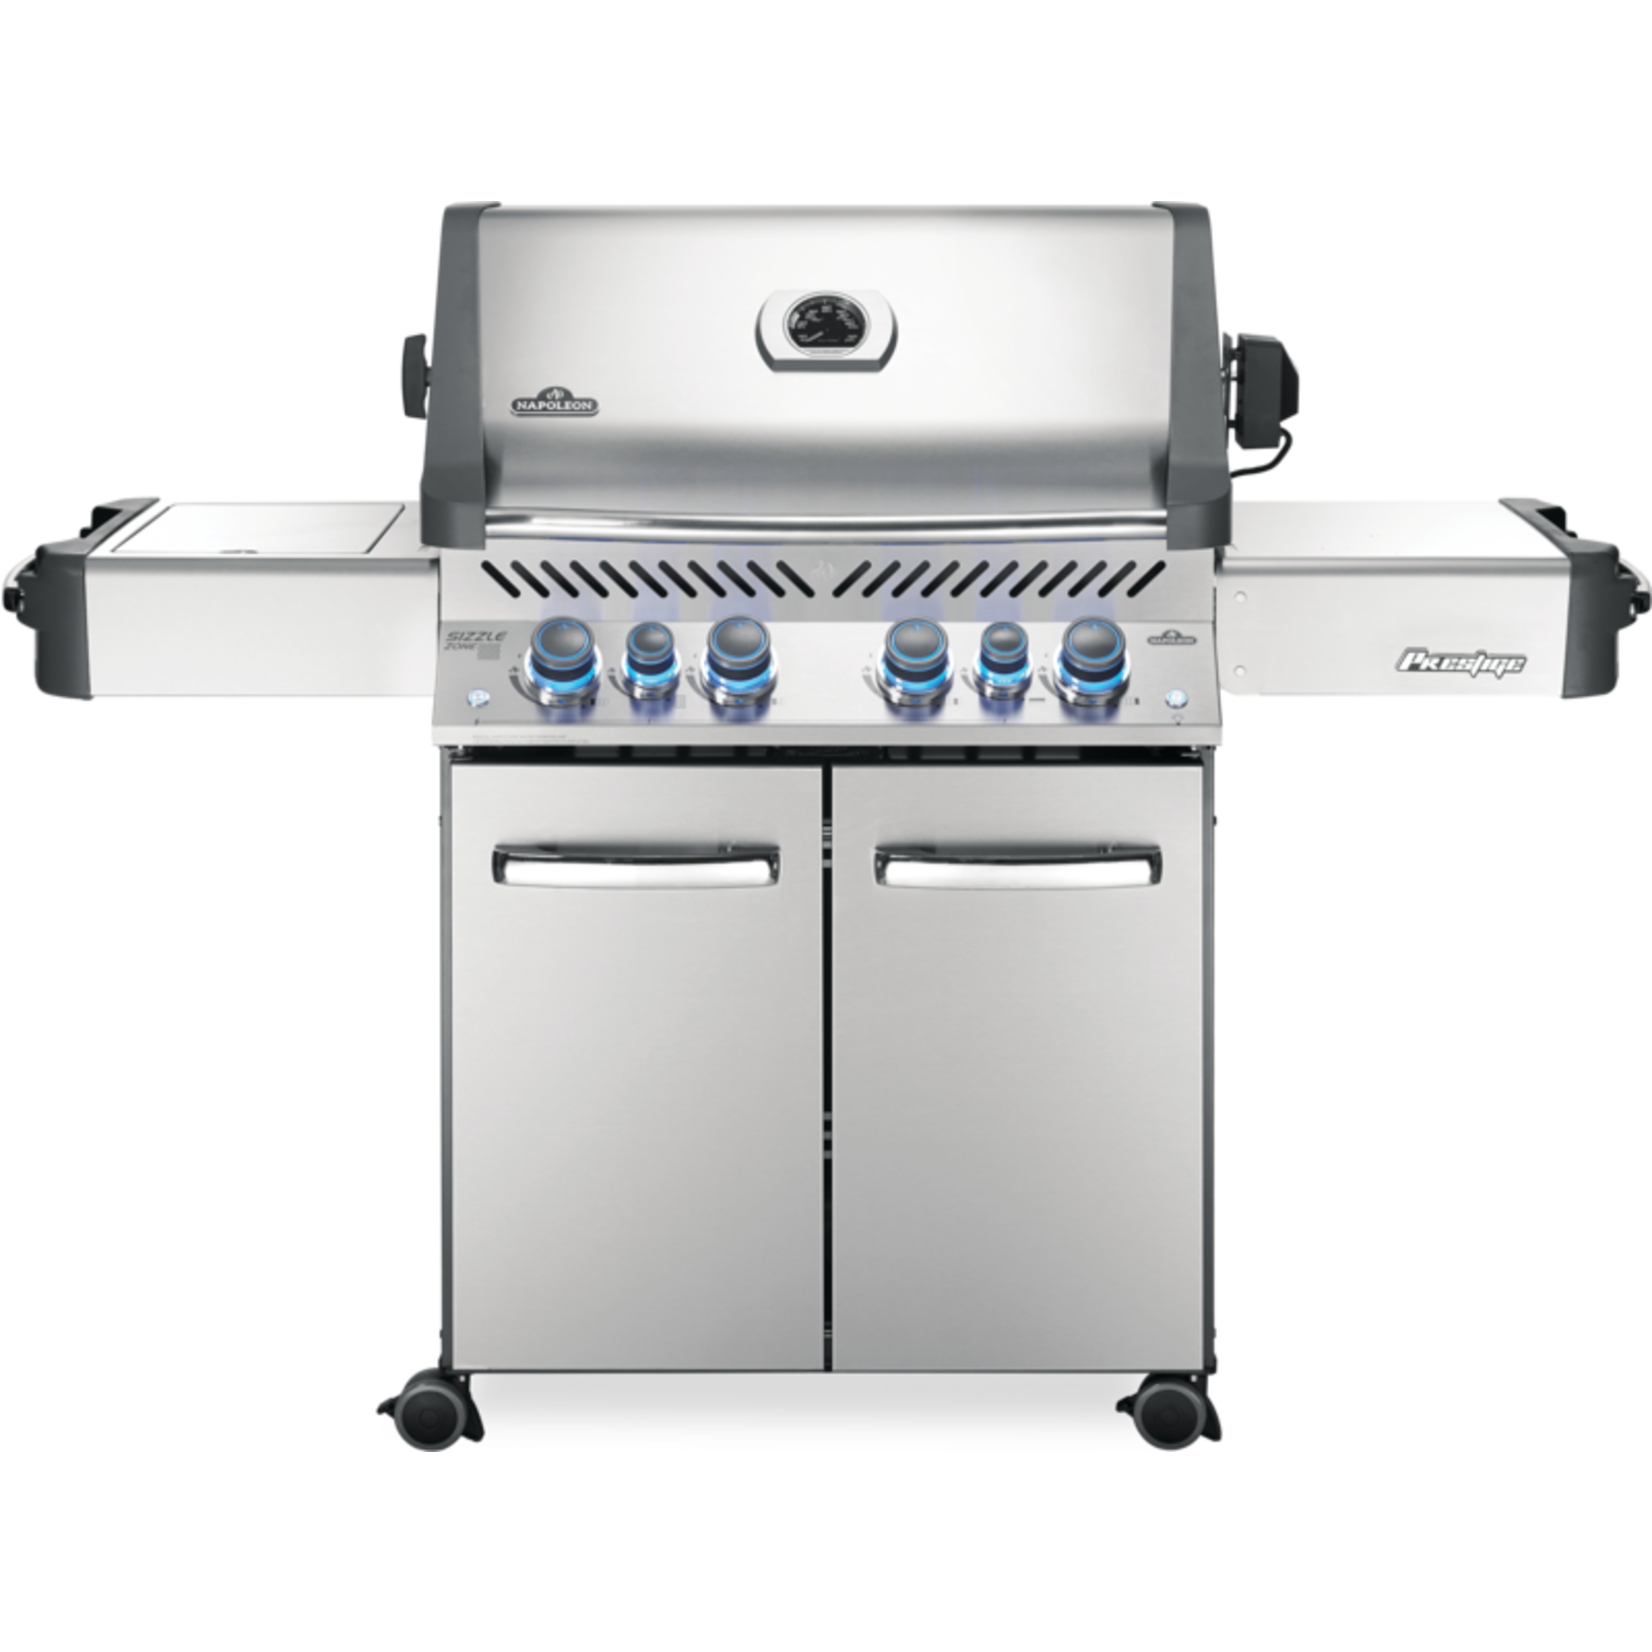 Napoleon Prestige® 500 Propane Gas Grill with Infrared Side and Rear Burners, Stainless Steel